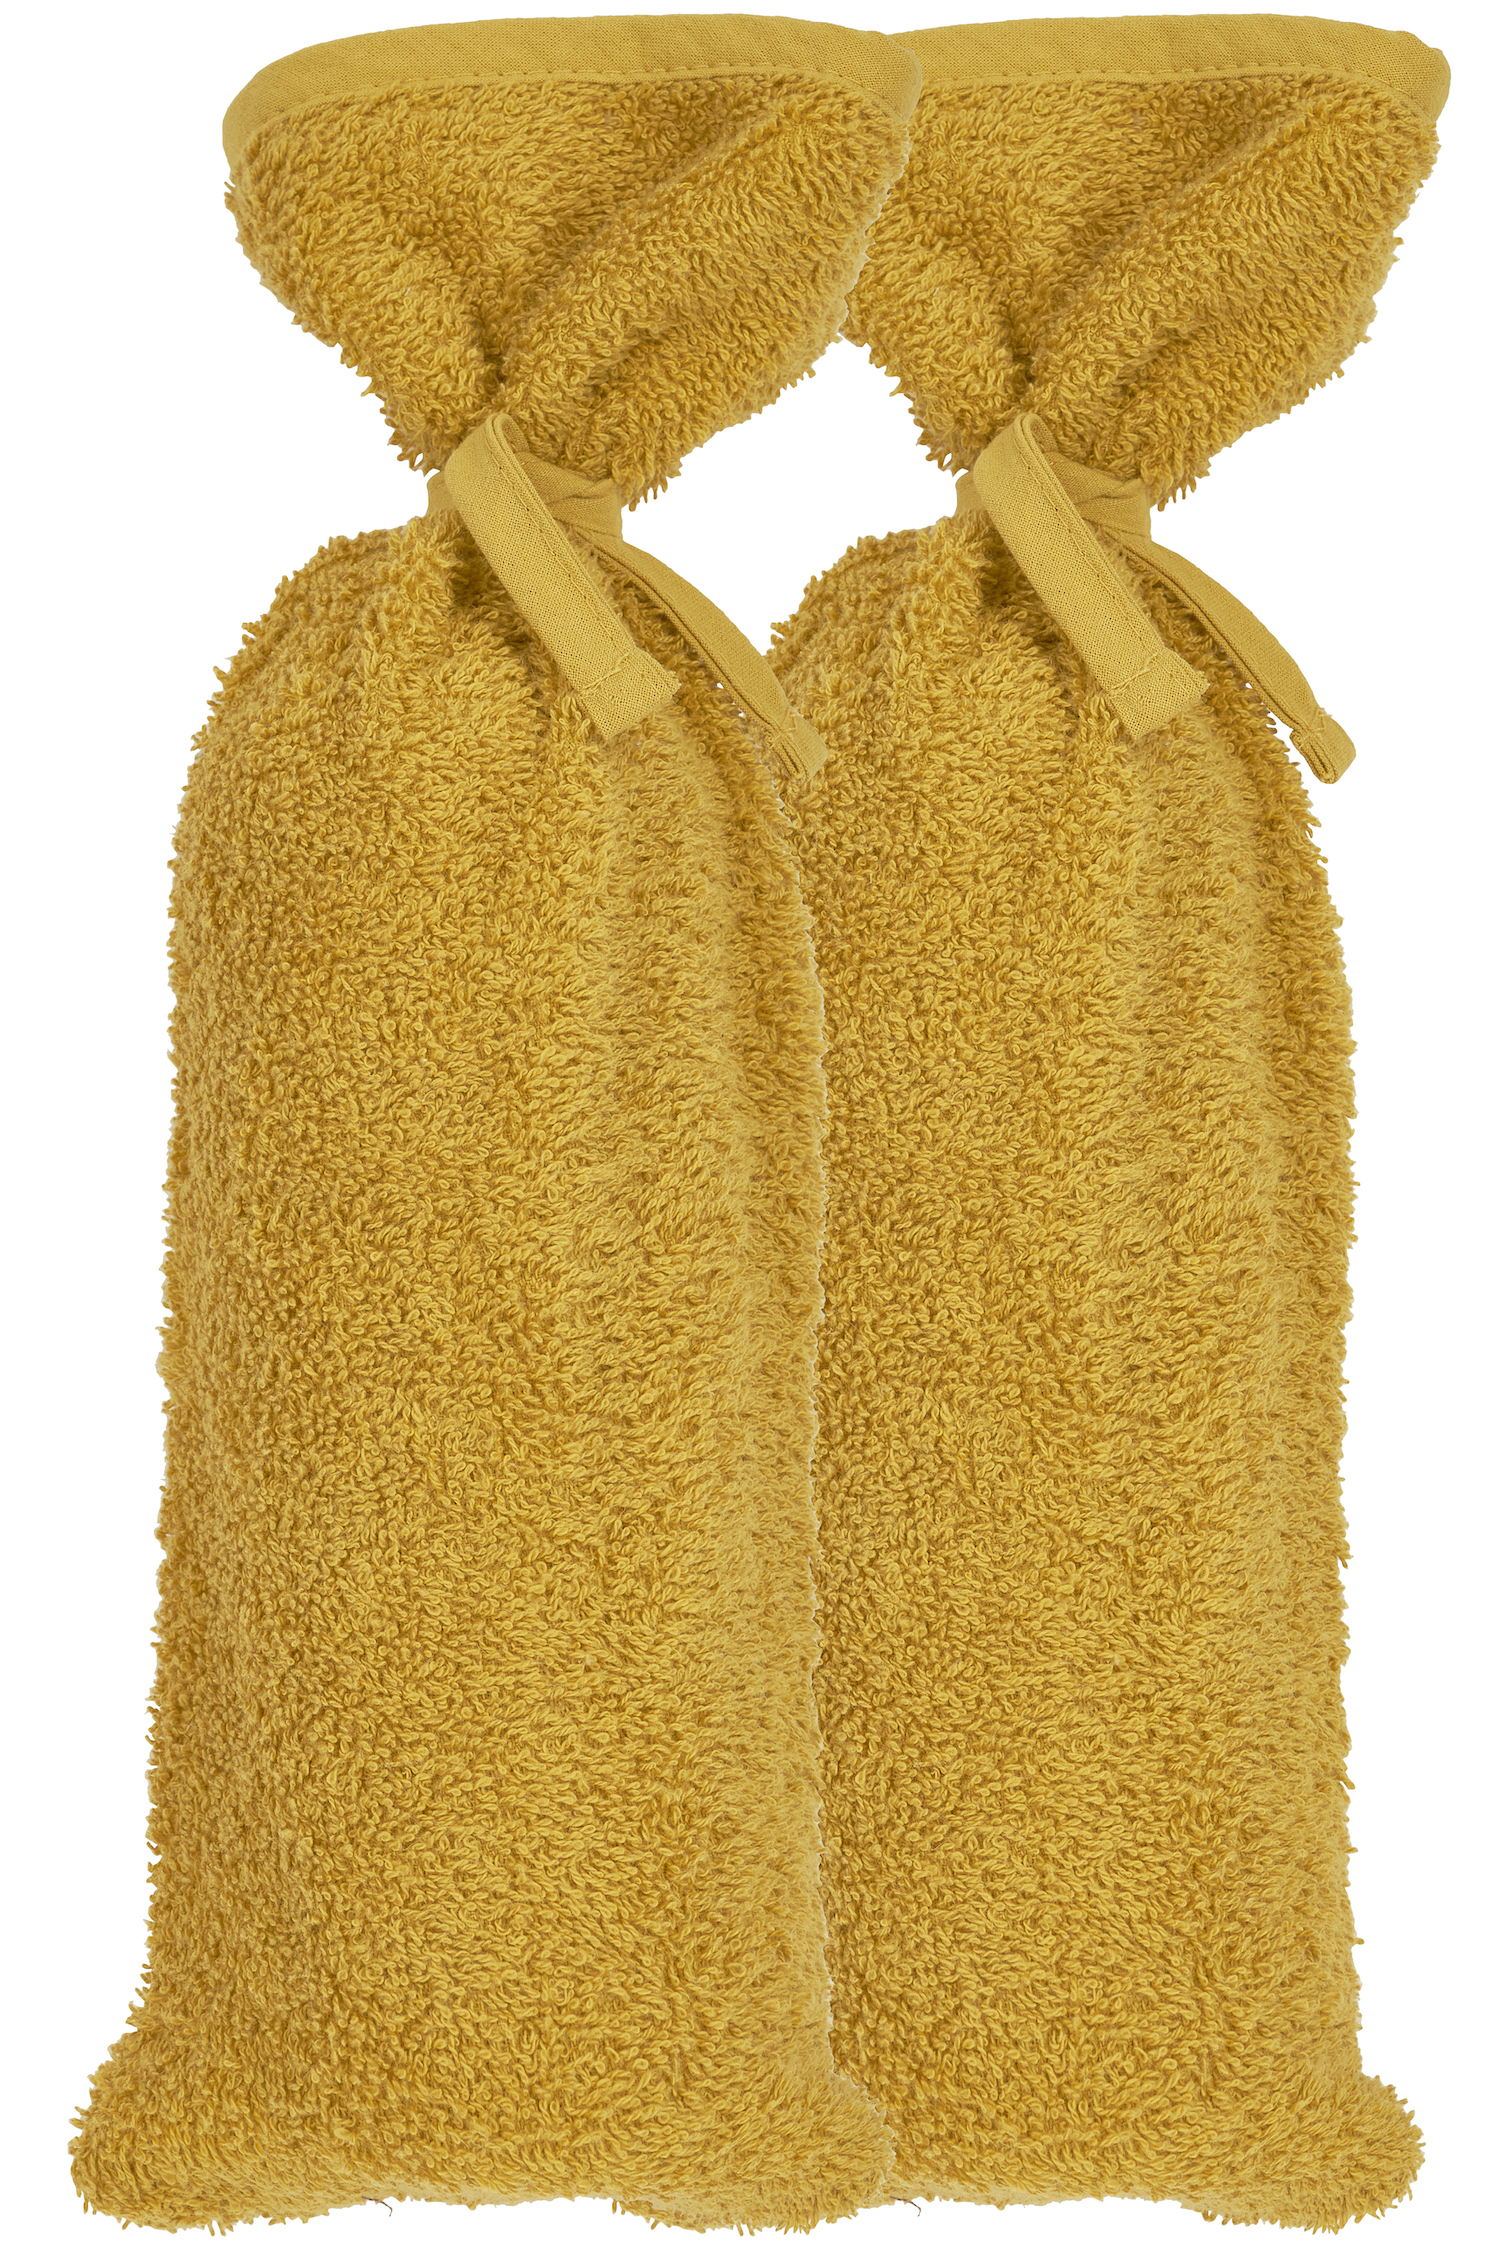 Hot Water Bottle Cover Basic Terry 2-pack - Honey Gold - 13xh35cm